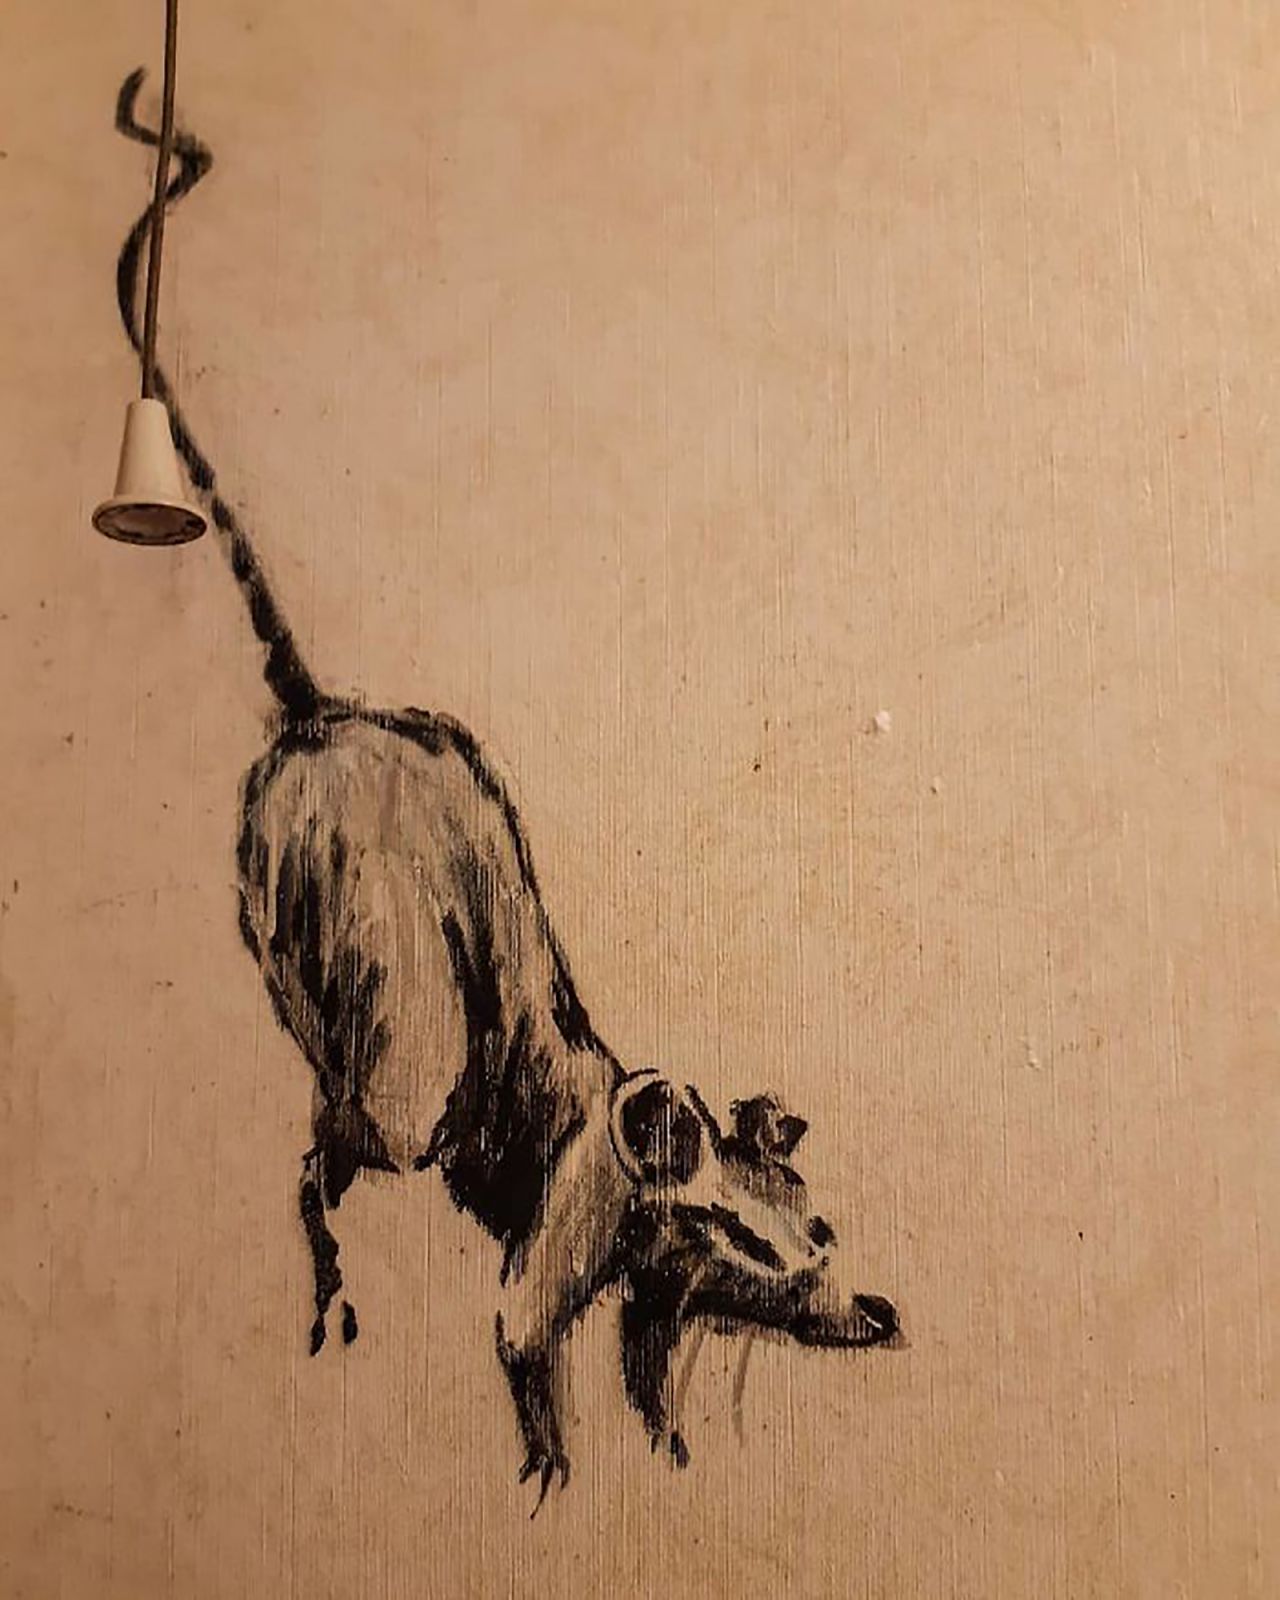 Another rat hangs from the light switch by its tail.